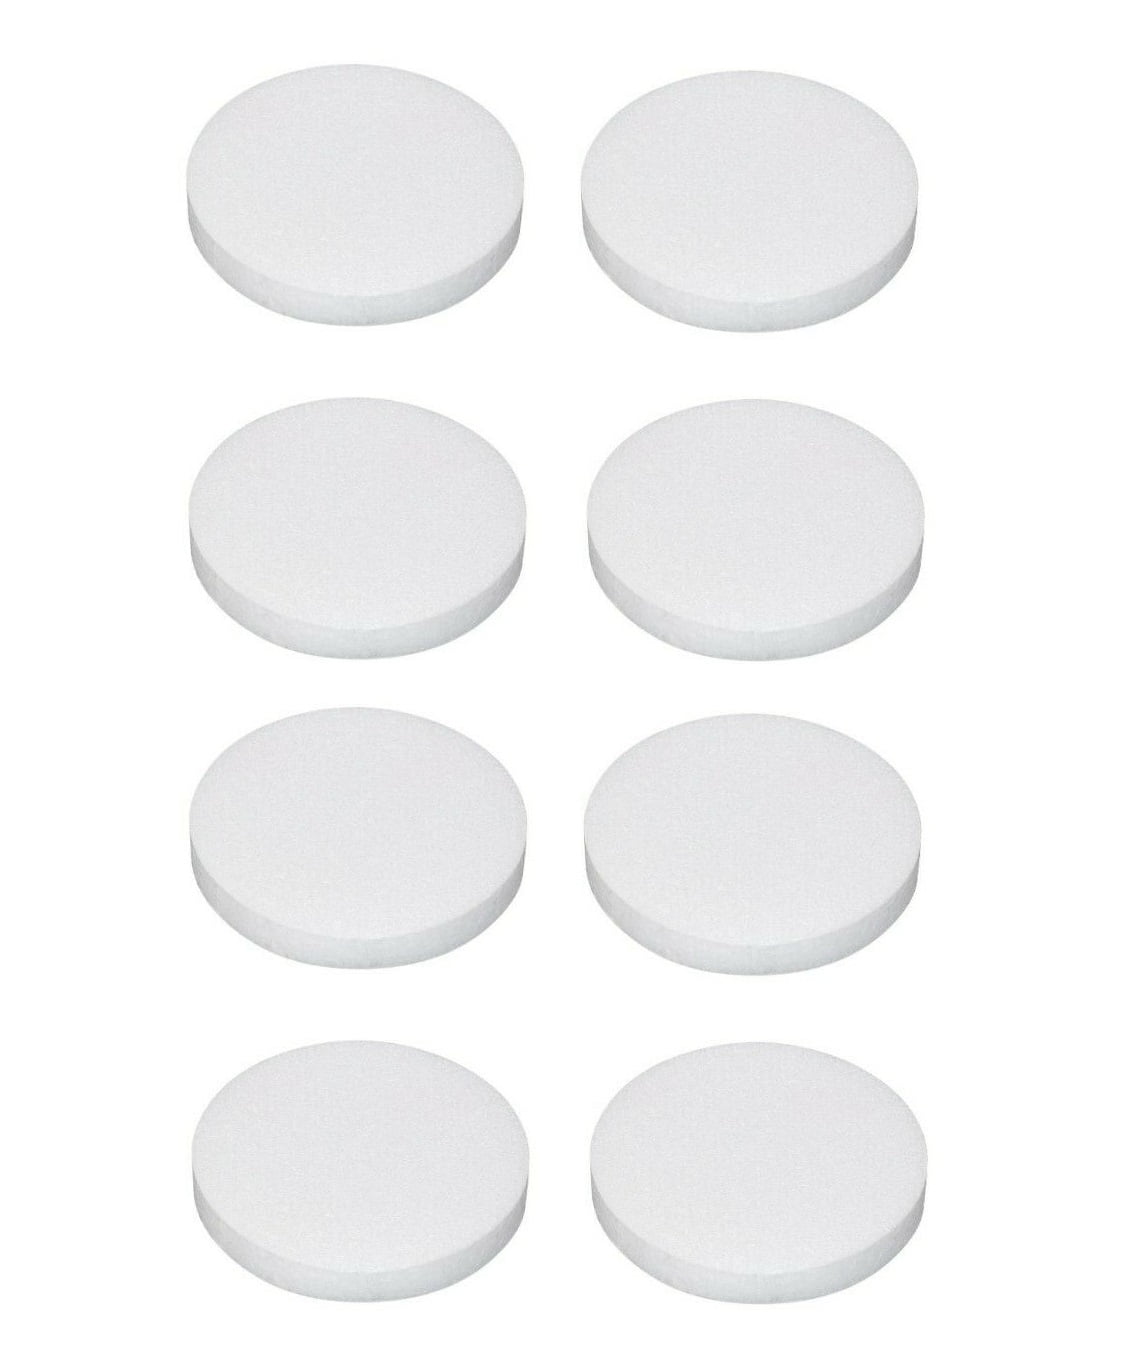 8 Inch Foam Circles for Crafts, 1 Inch Thick Round Polystyrene Discs for  DIY Projects (White, 6 Pack) 